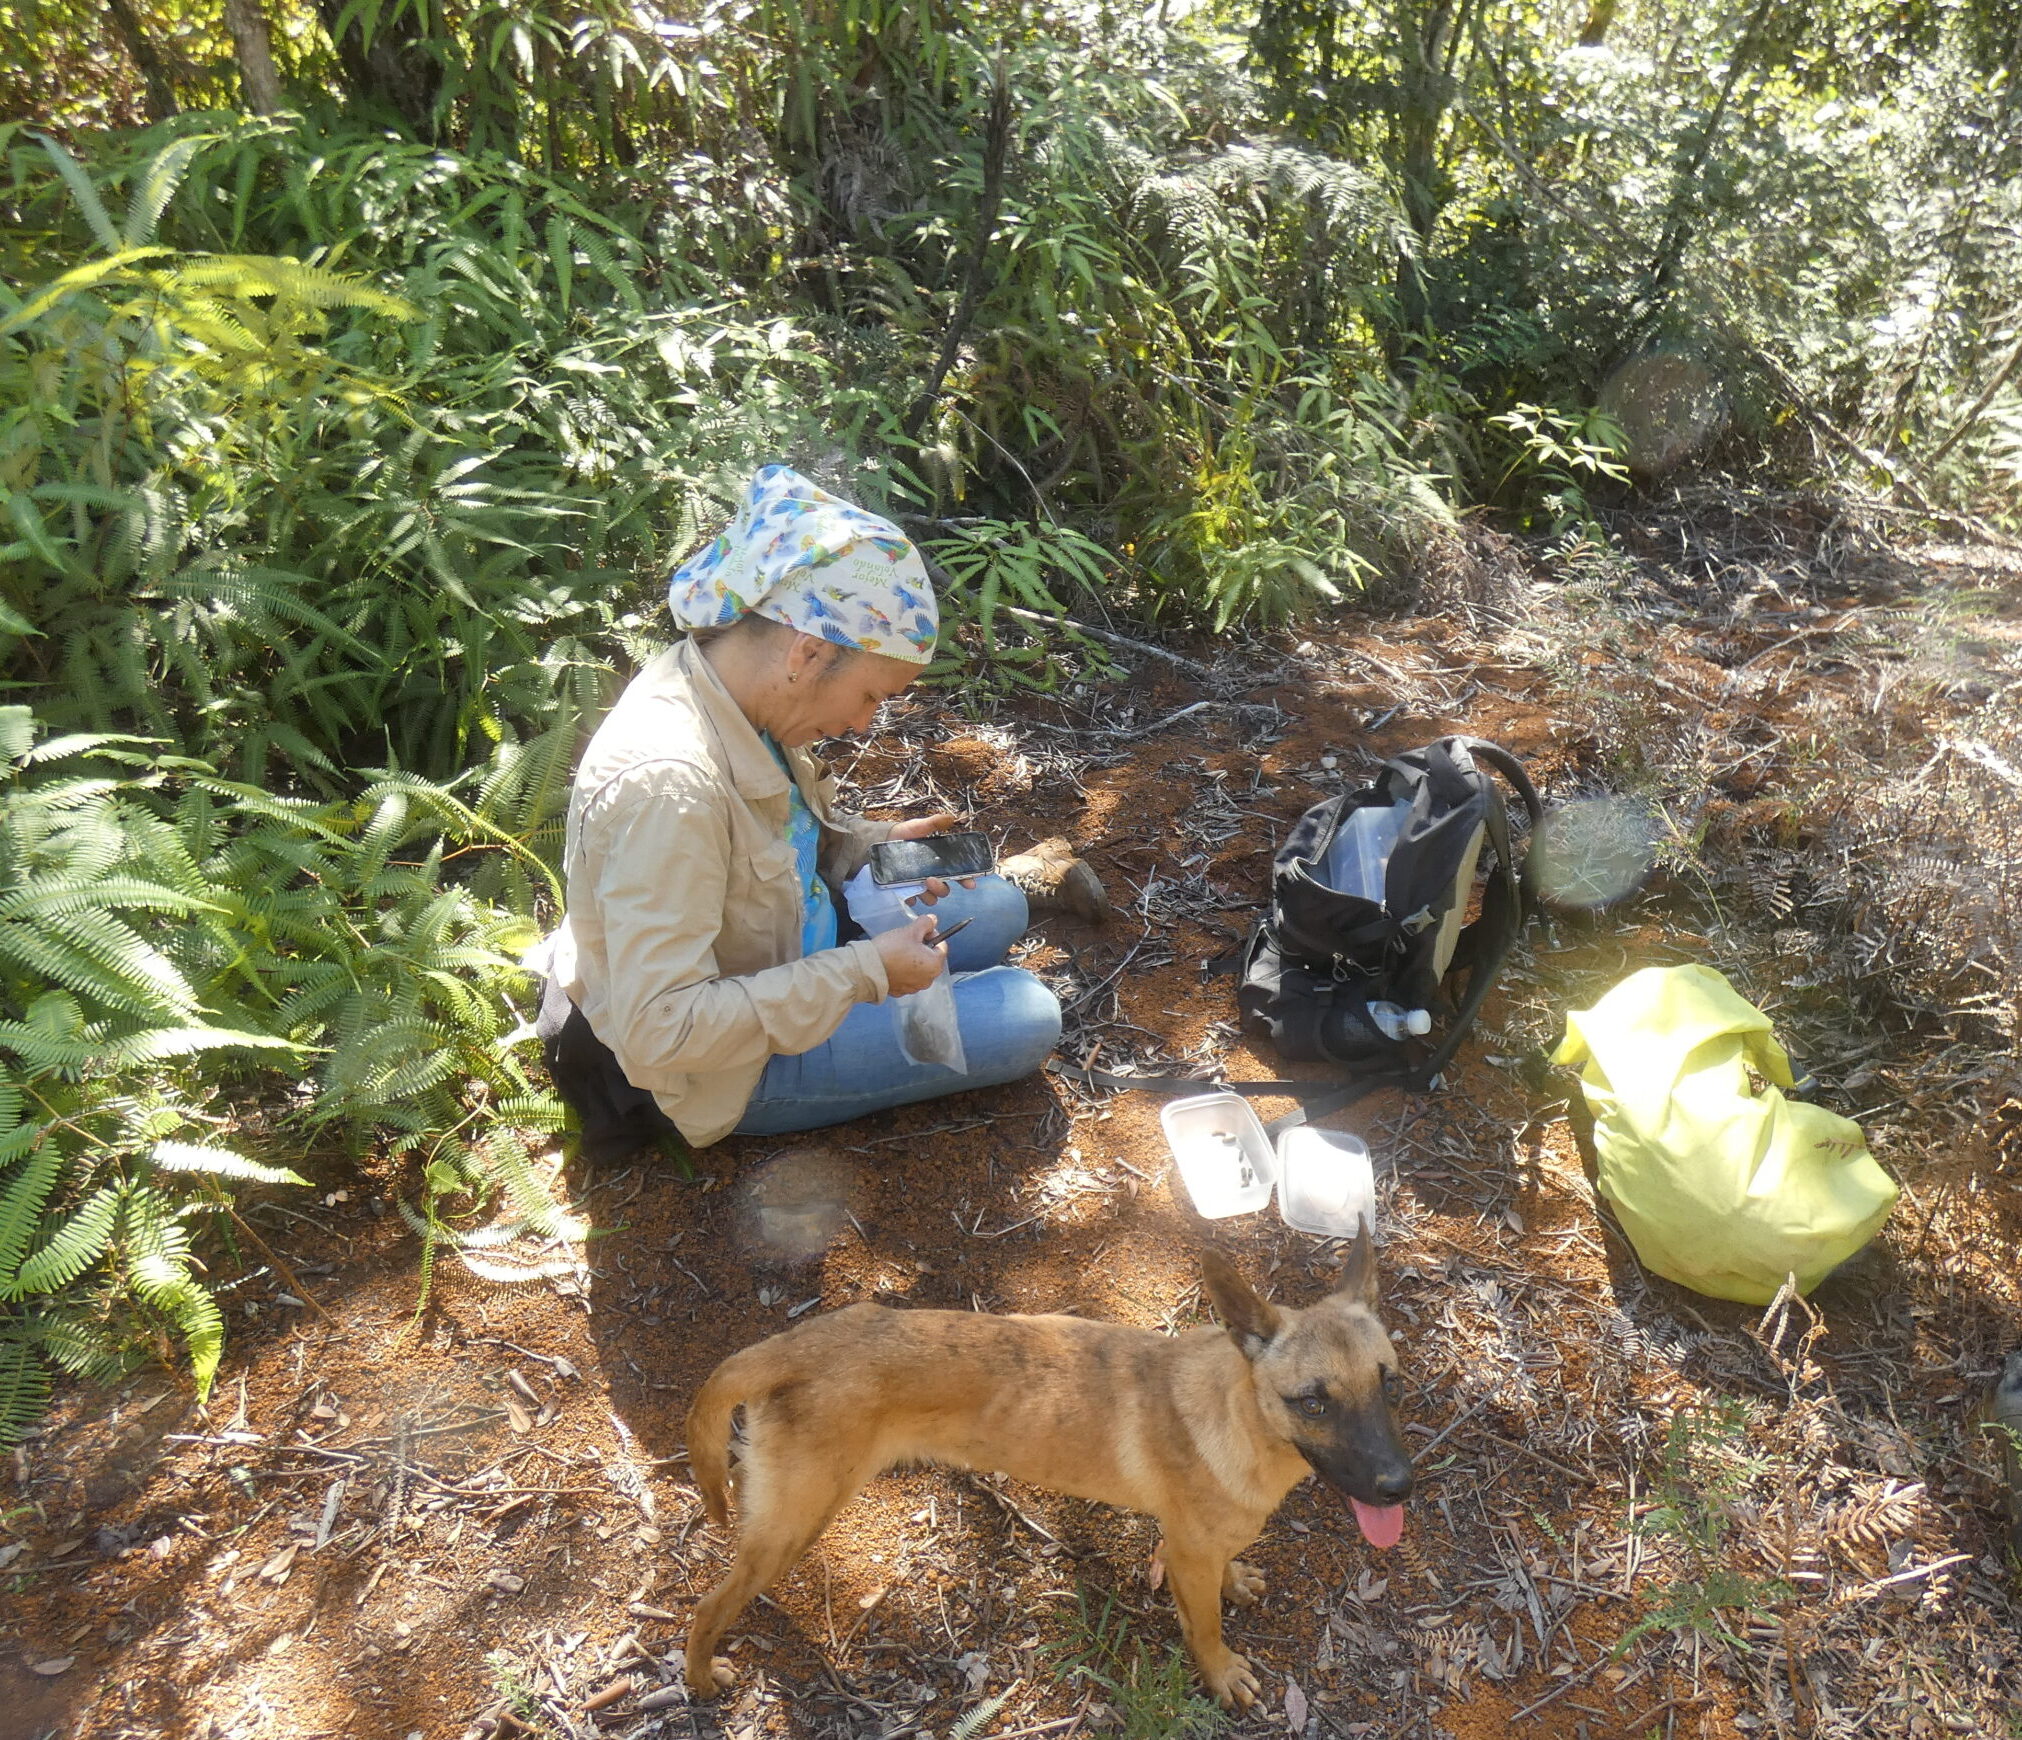 Norvis collecting samples in the field